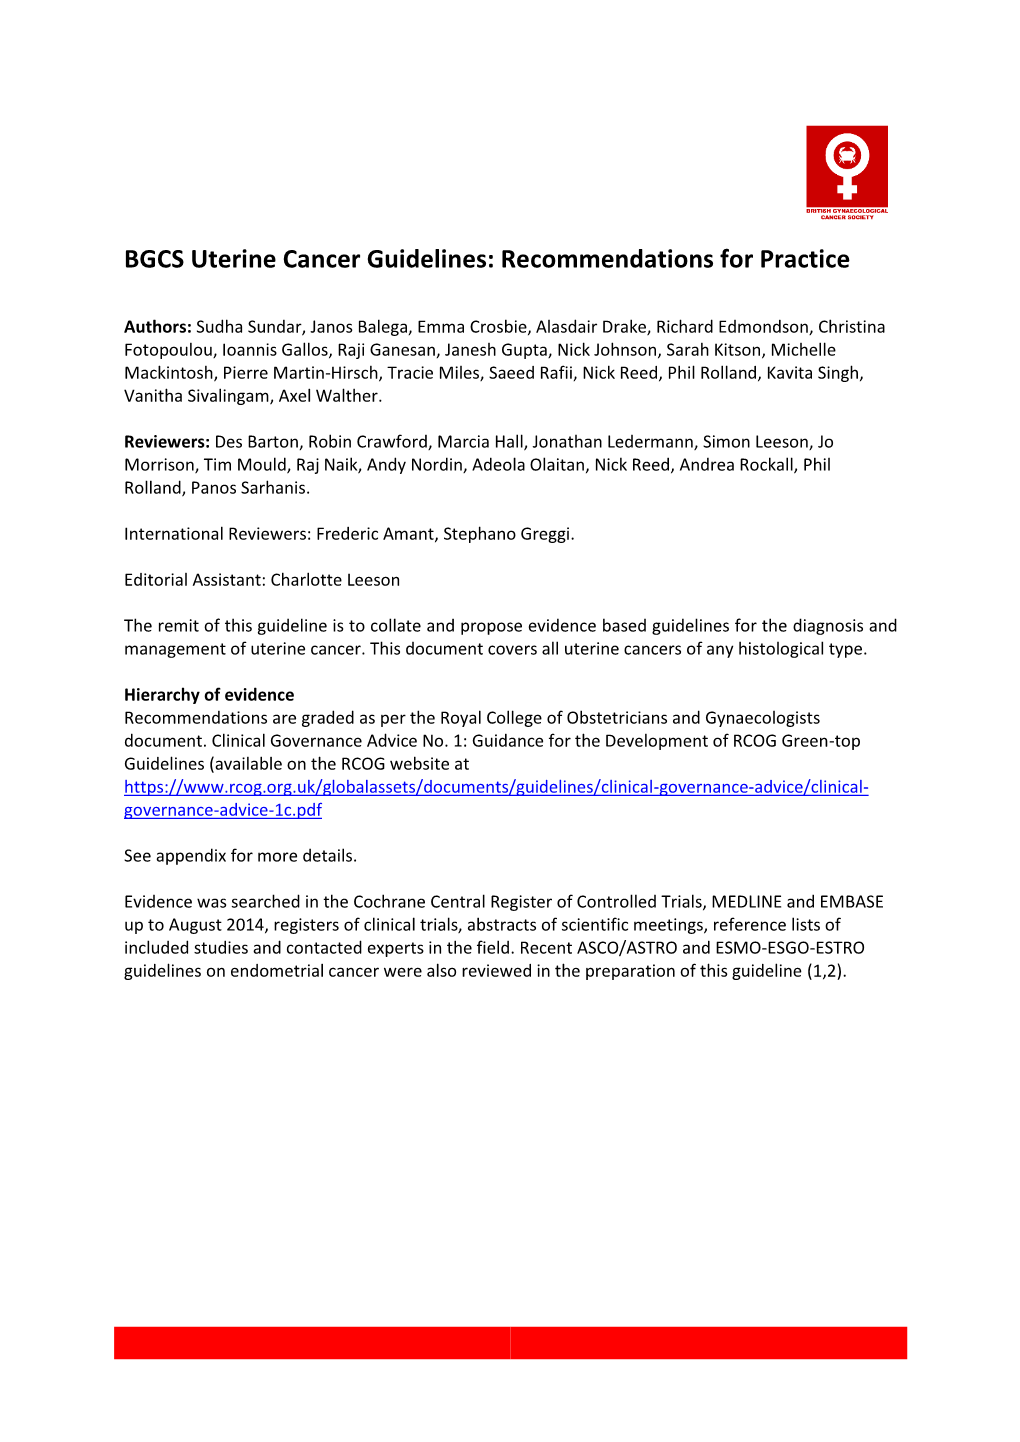 BGCS Uterine Cancer Guidelines: Recommendations for Practice